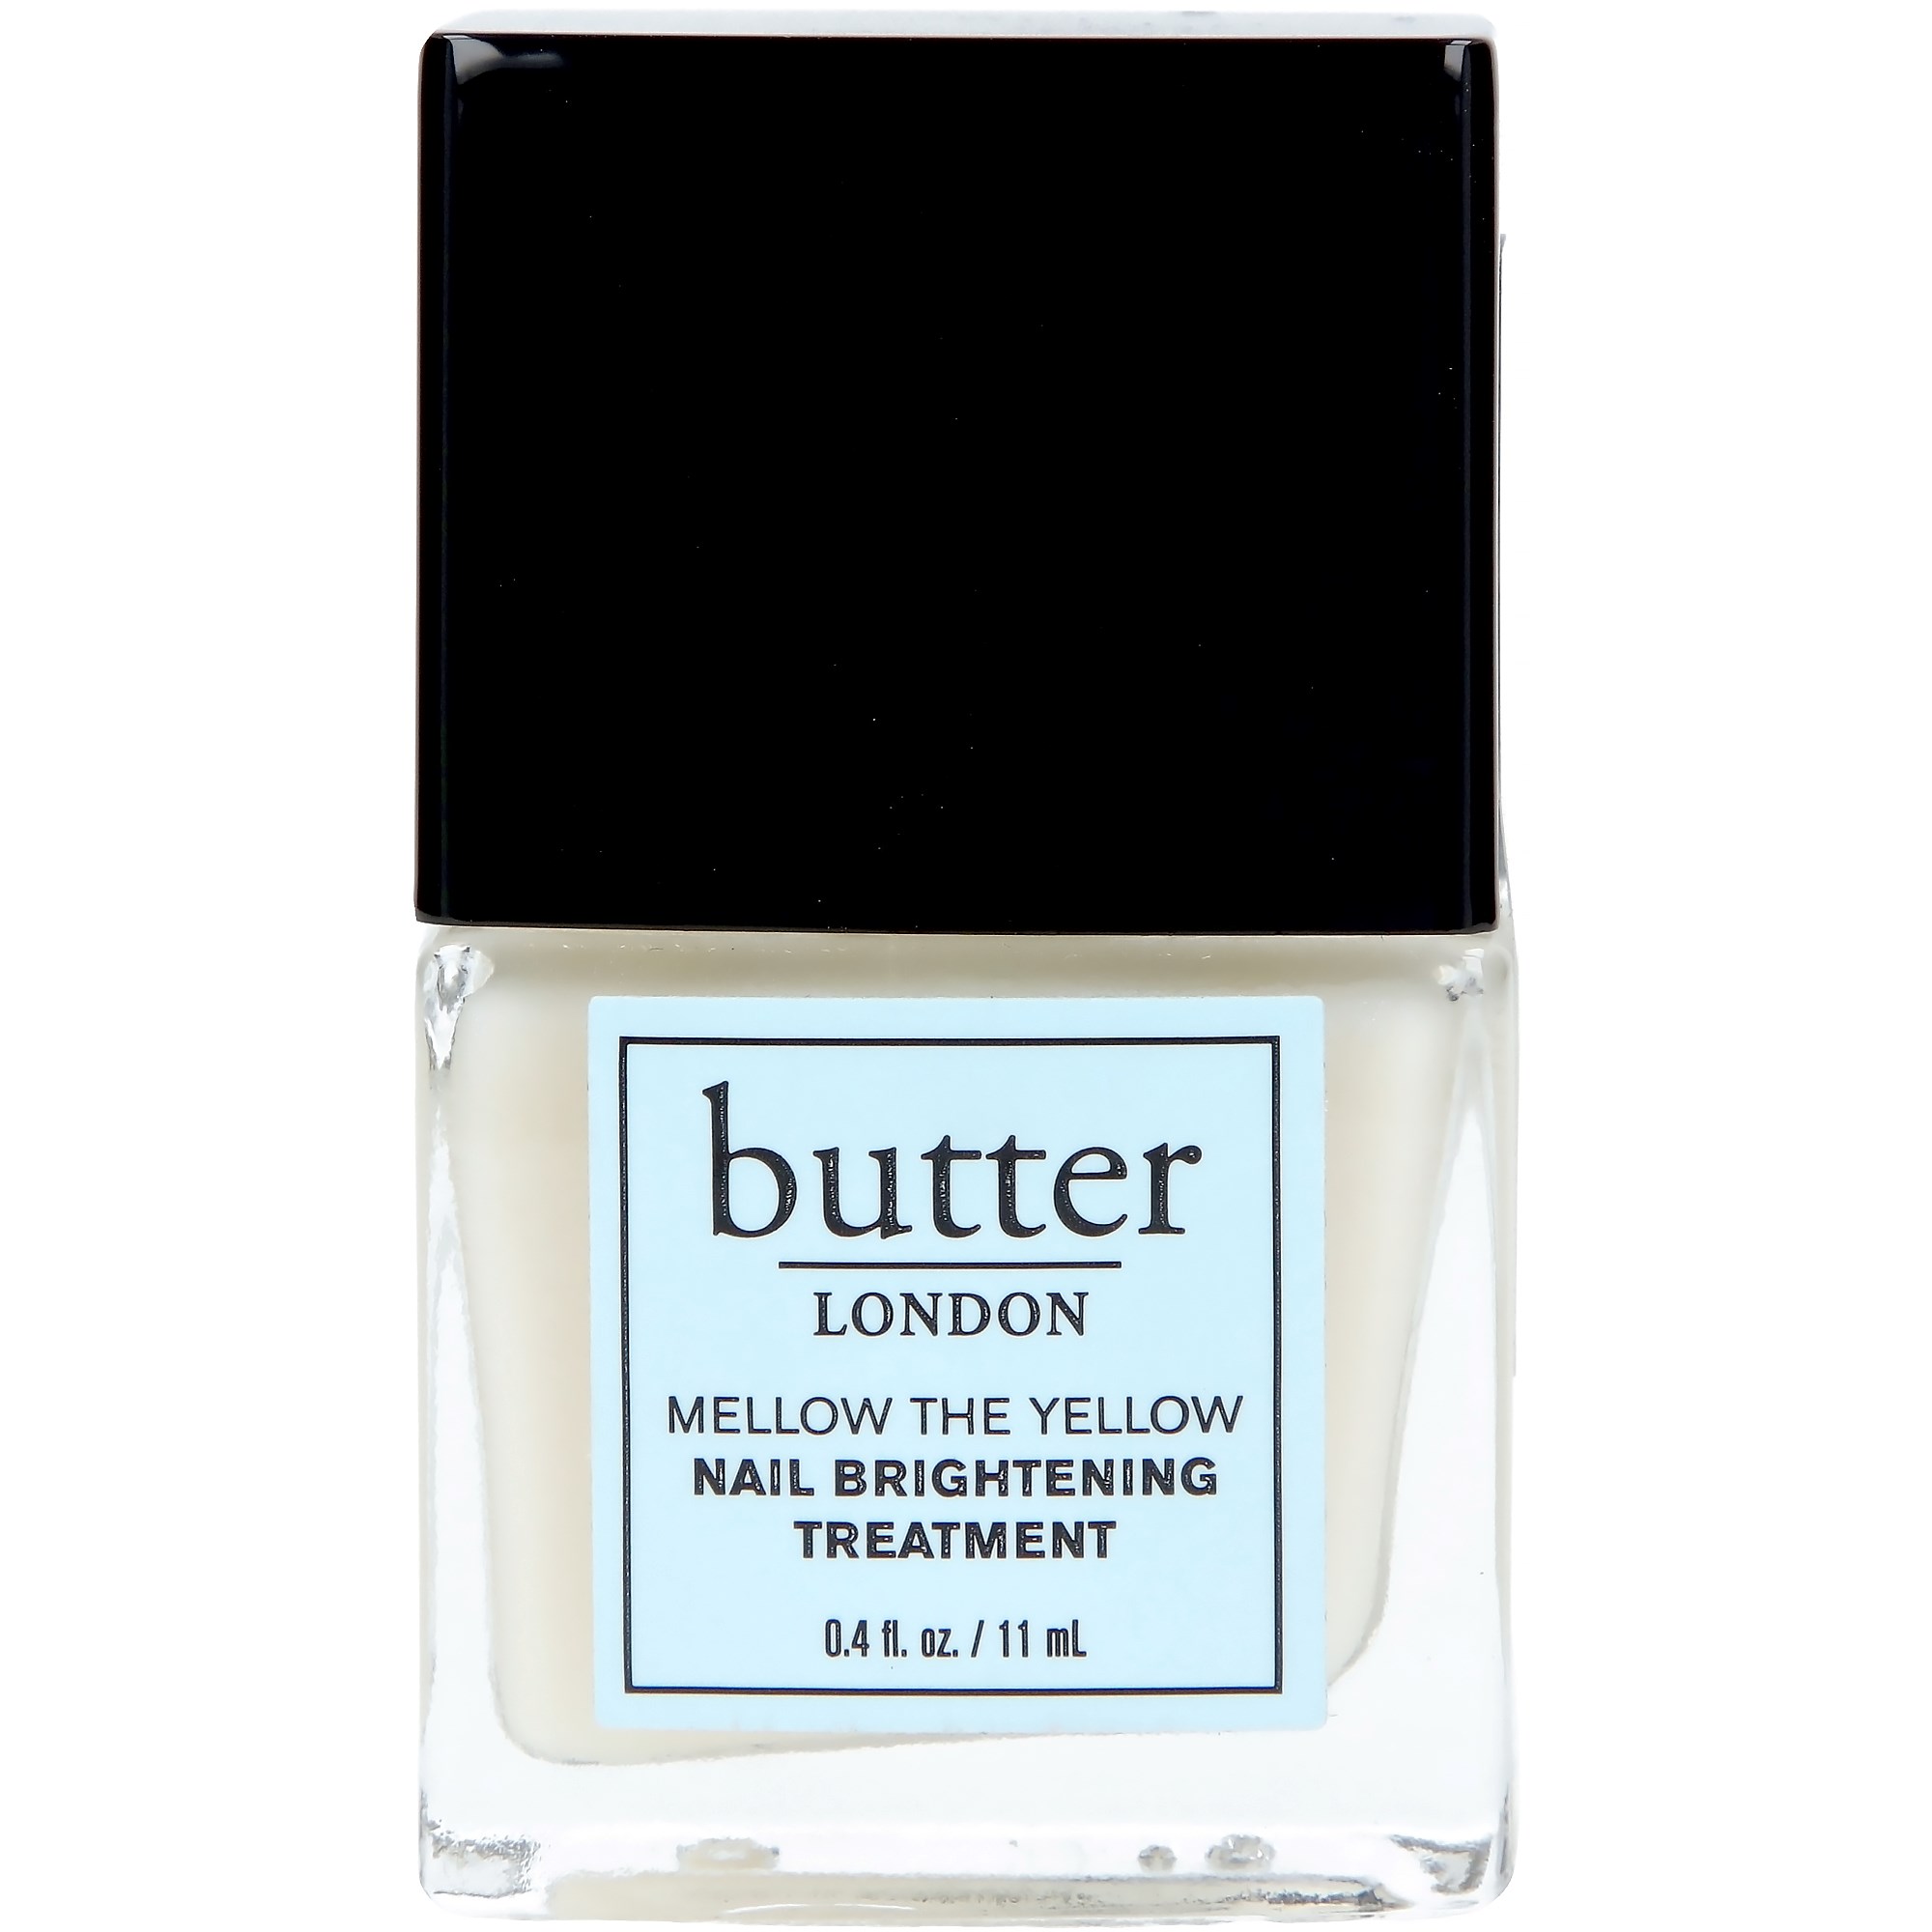 butter London Mellow The Yellow Brightening Nail Treatment